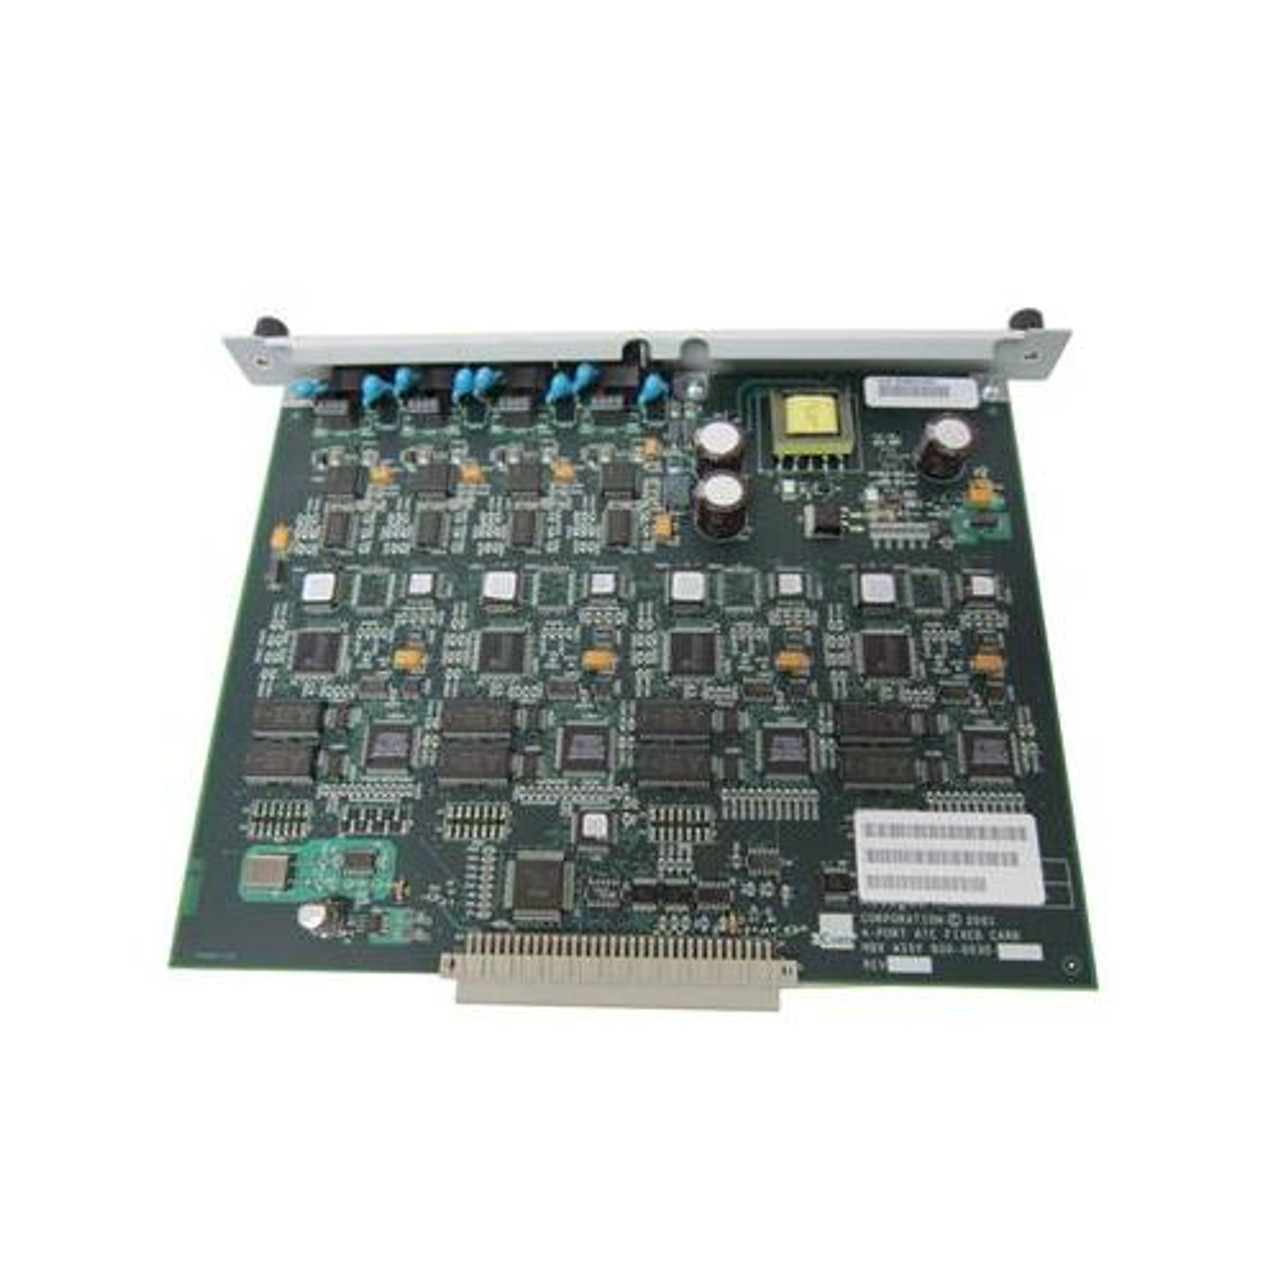 80-922993-01 3Com Total Control Chassis No Power Supply (Refurbished)